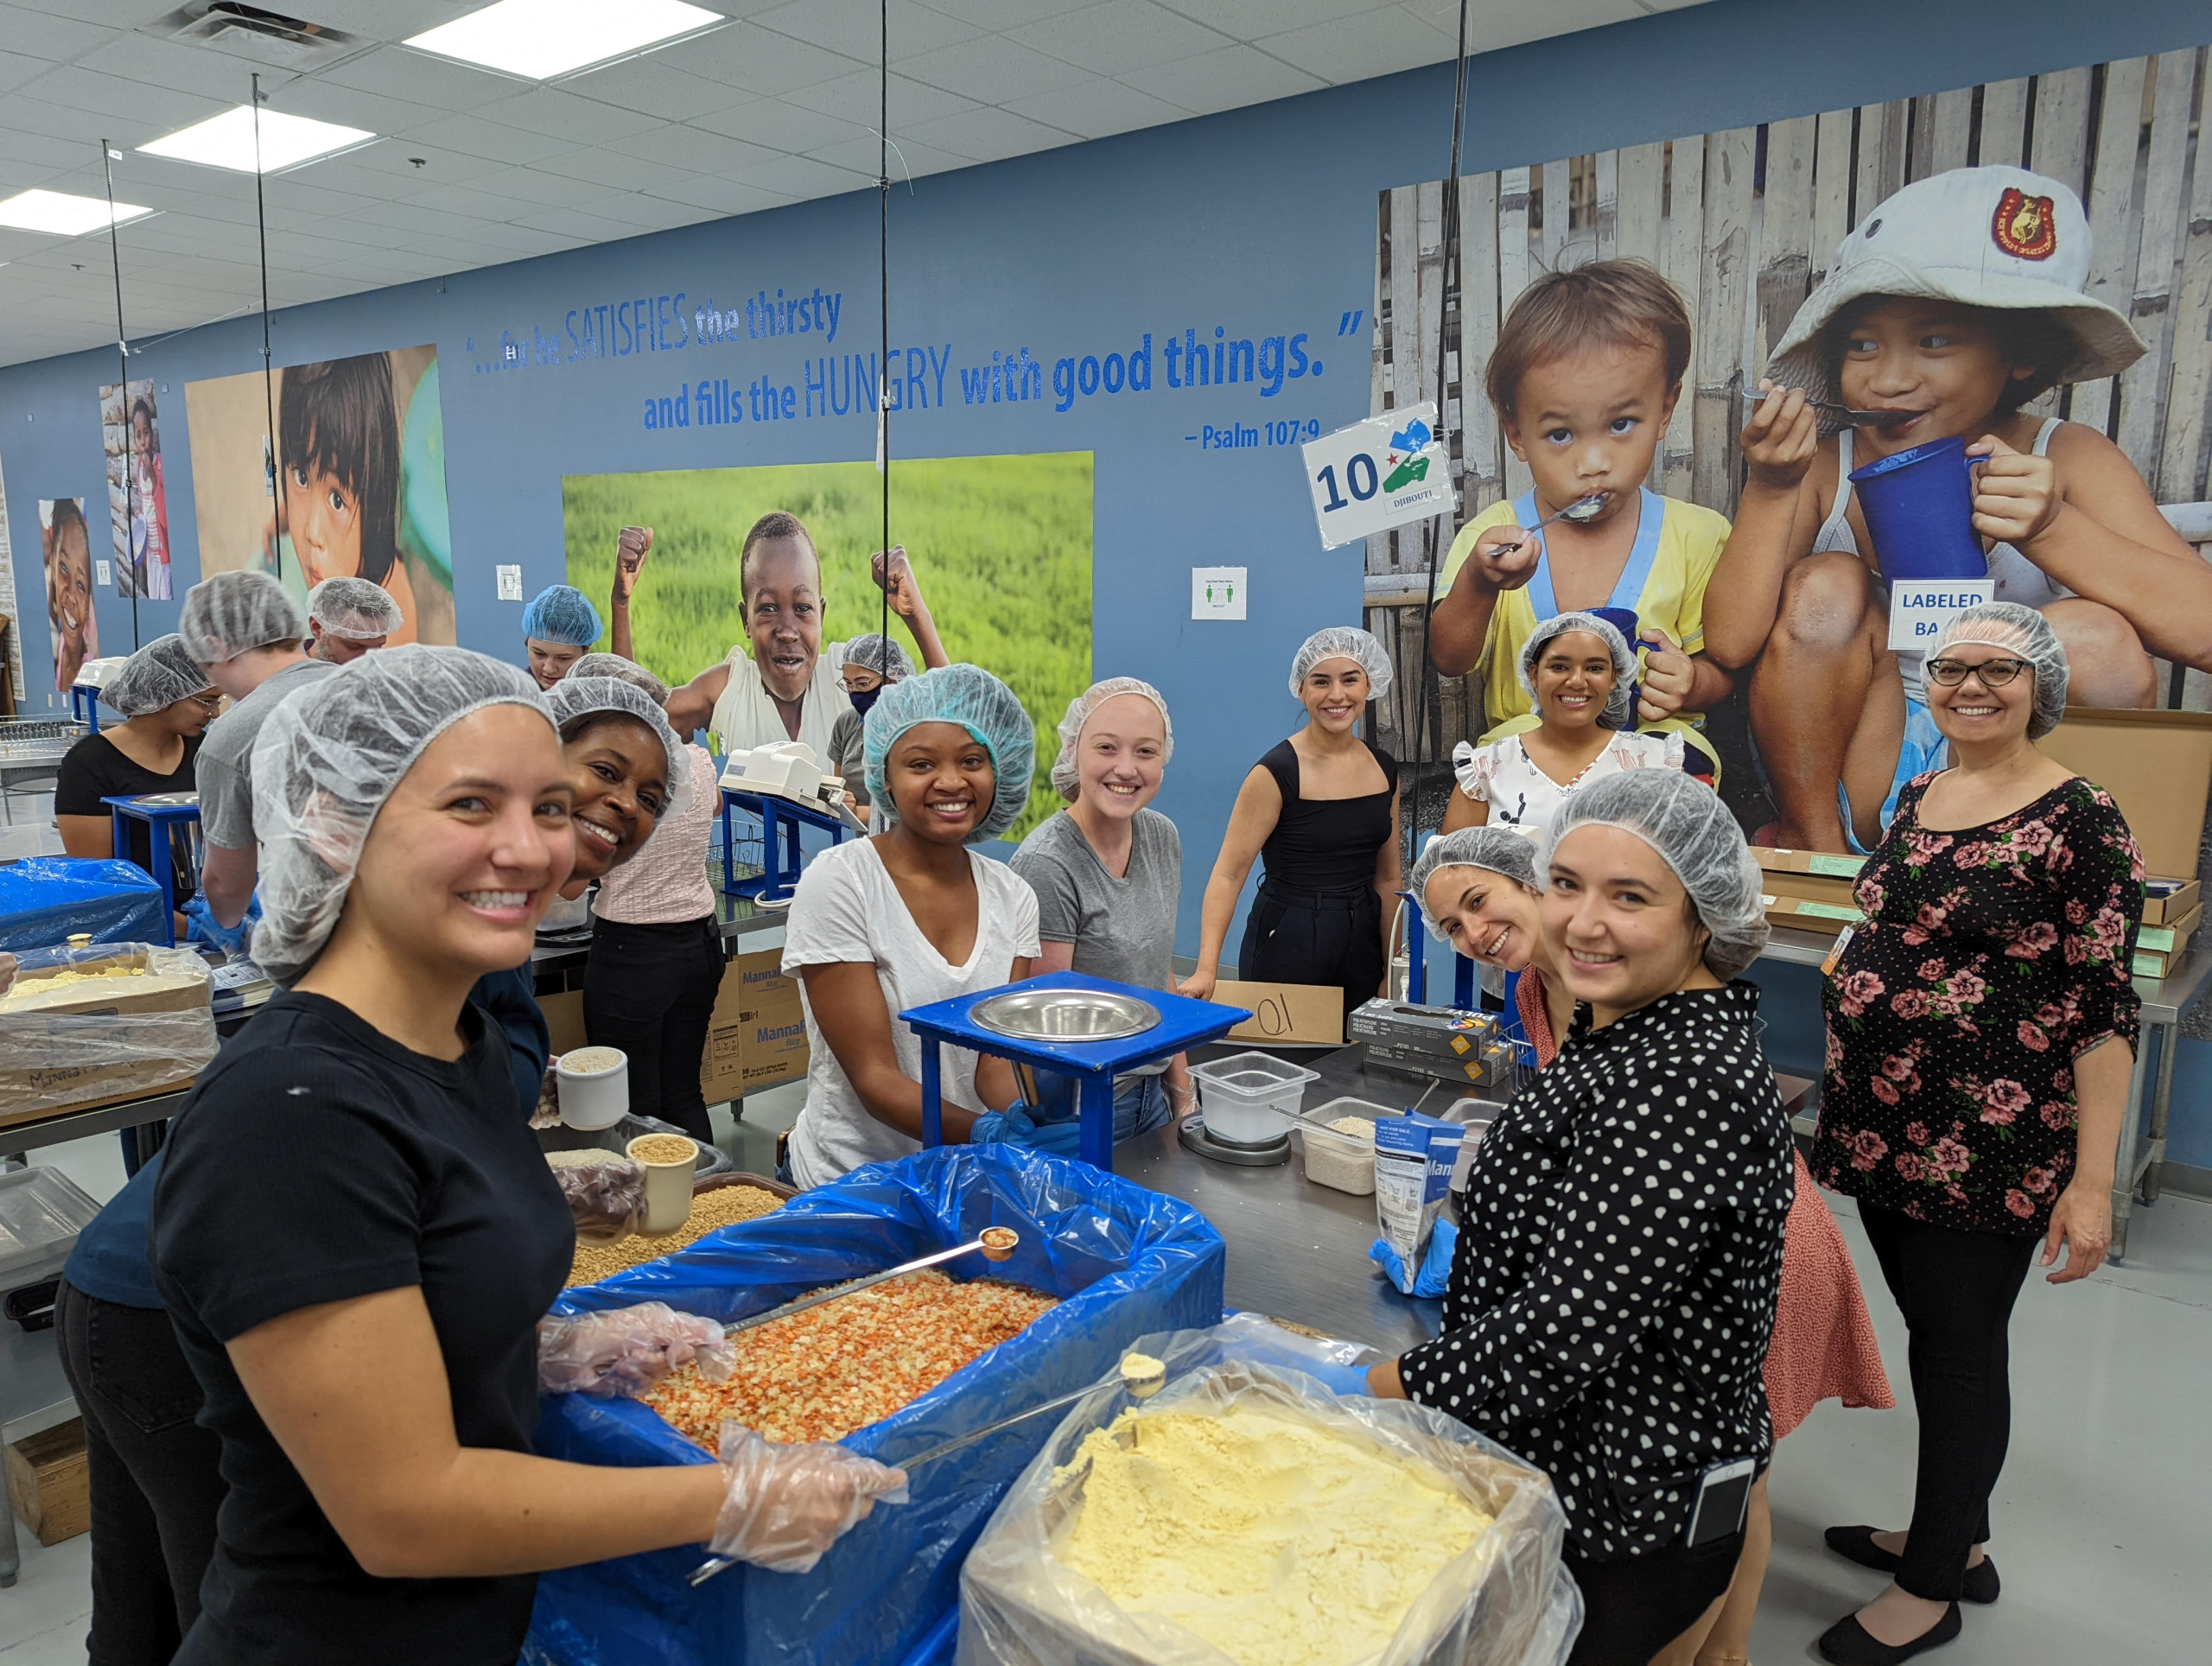 ATSU-ASHS students, faculty volunteer to pack over 21,000 meals for children in developing countries